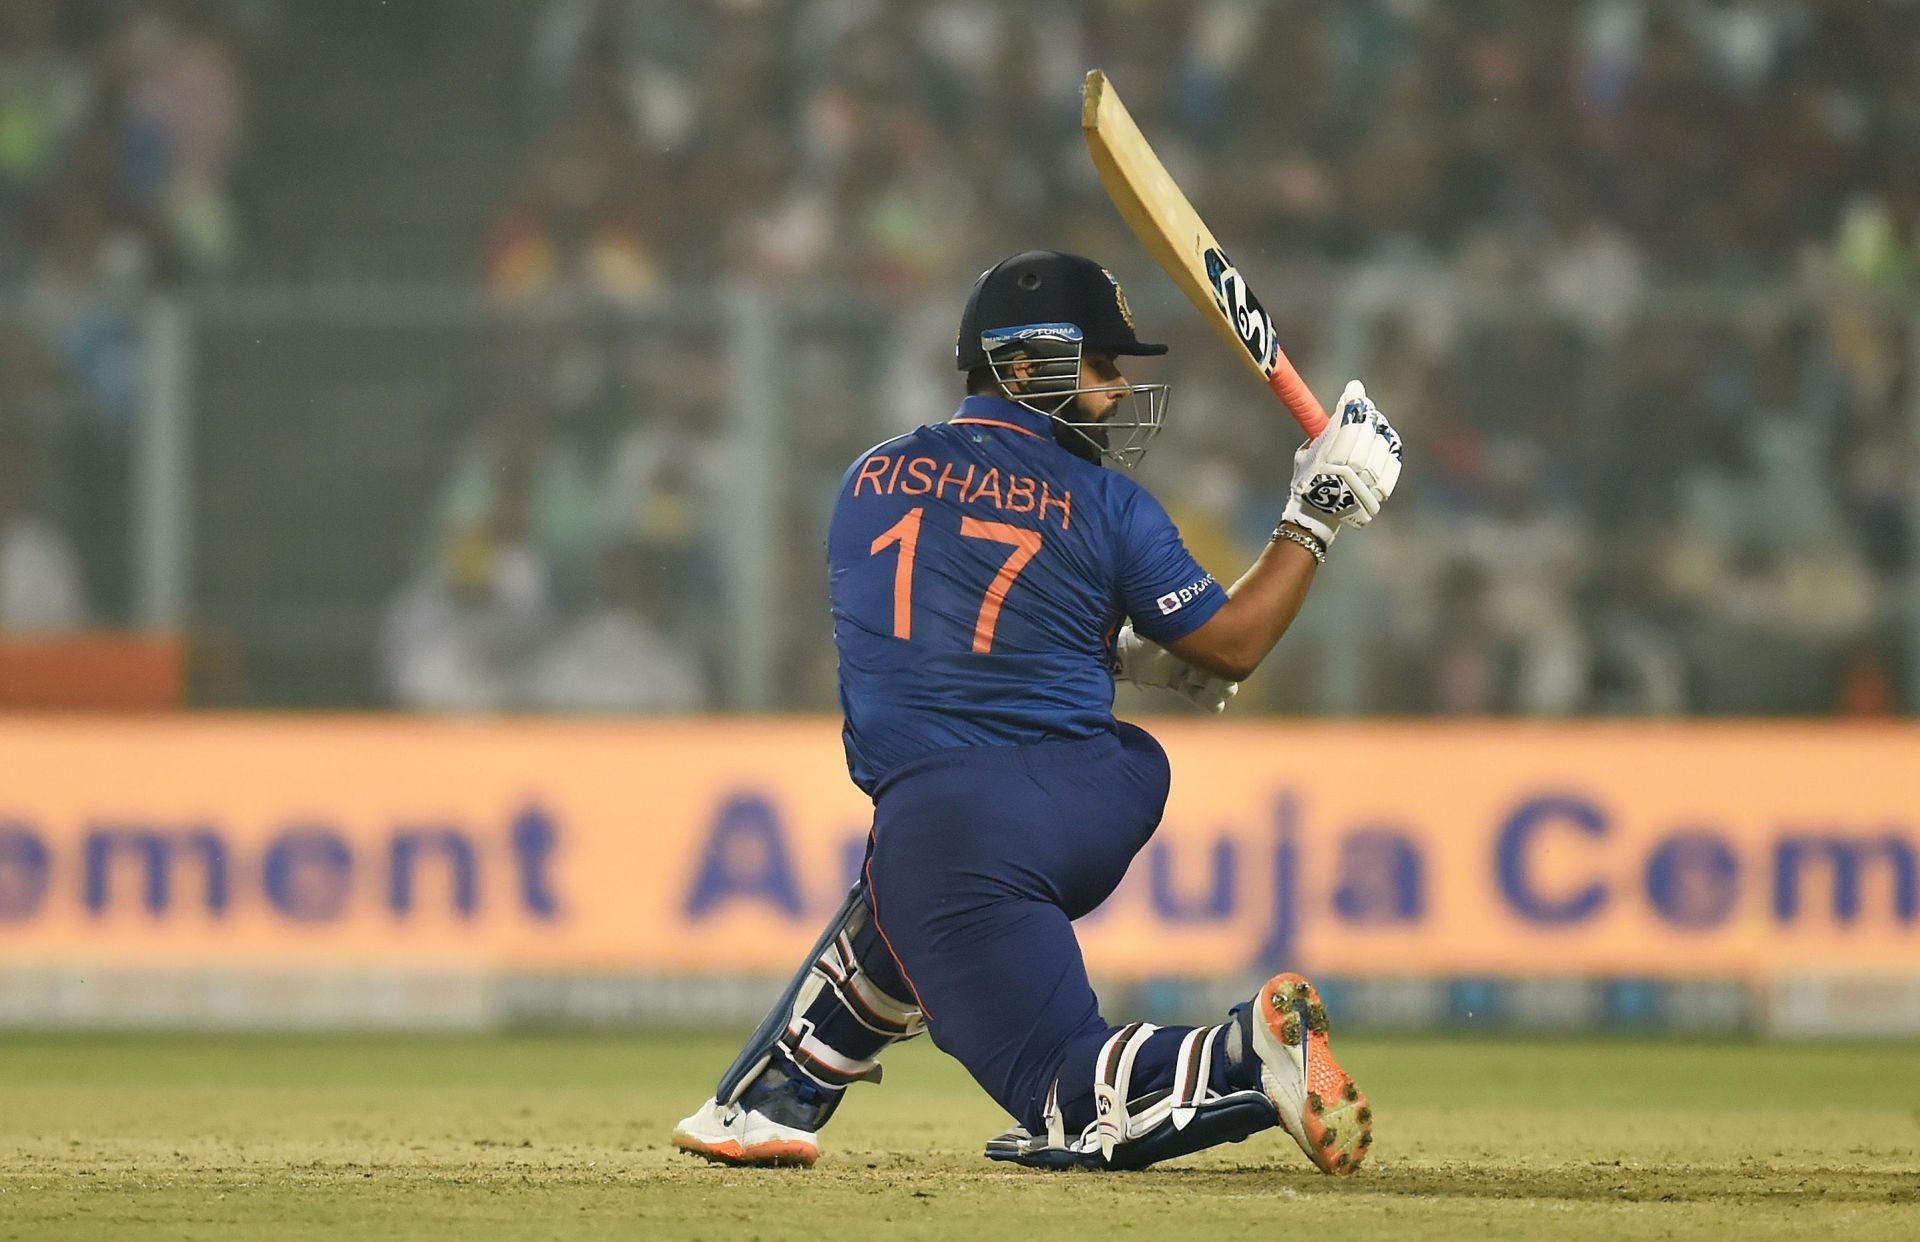 Rishabh Pant is yet to master the limited-overs formats of the game